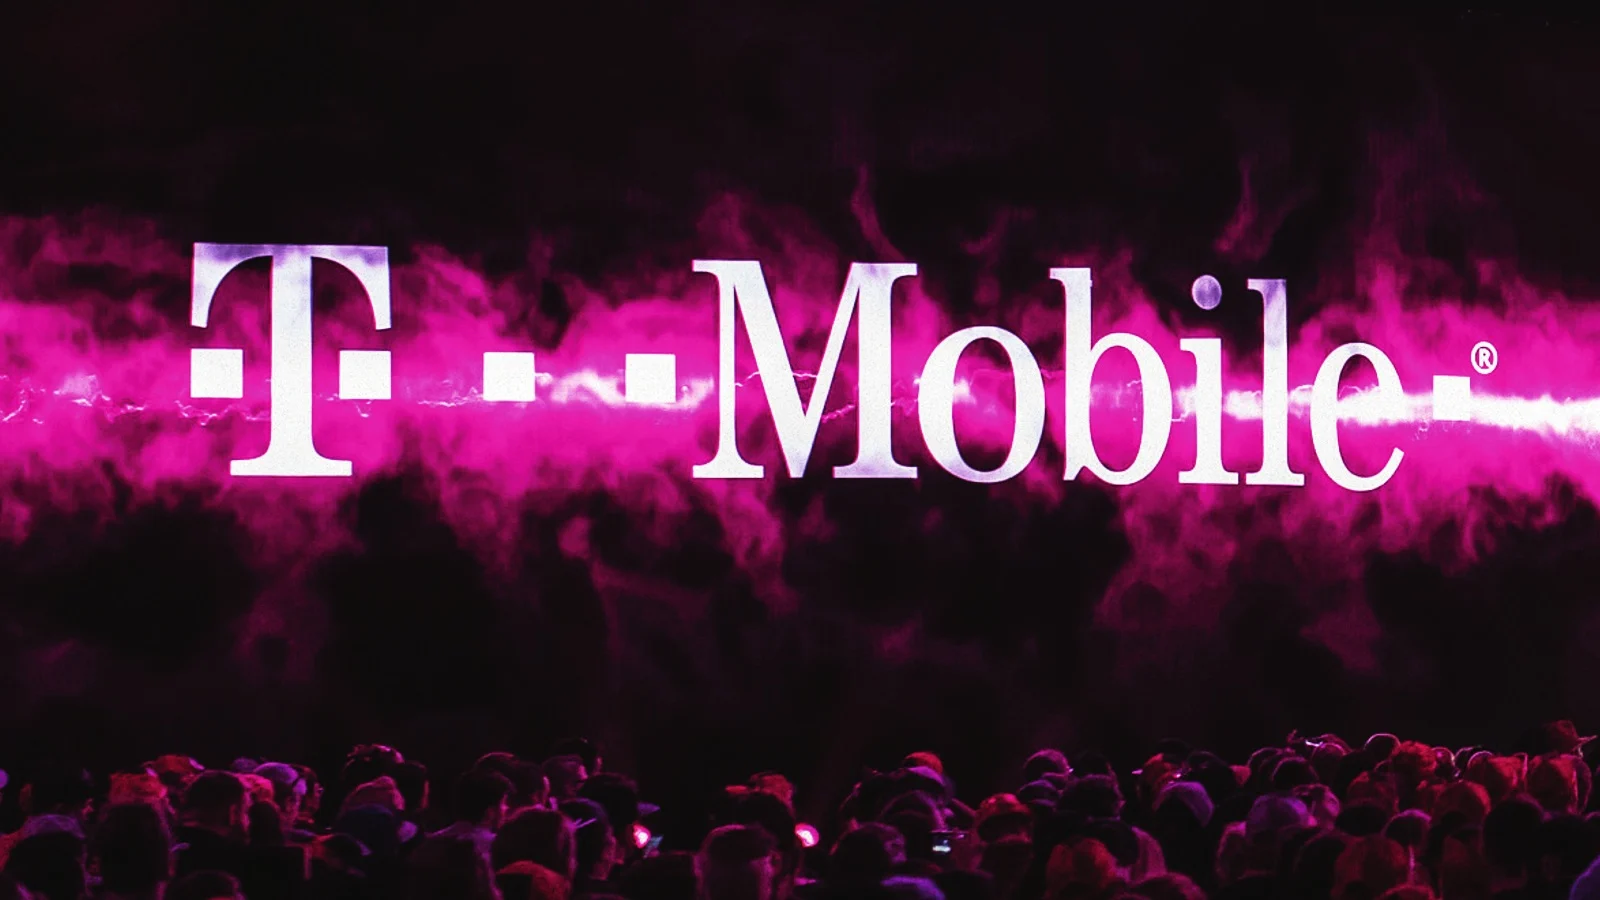 T-Mobile Extends Lifeline for 2G Users: A Glimpse into the Carrier's Latest Strategy